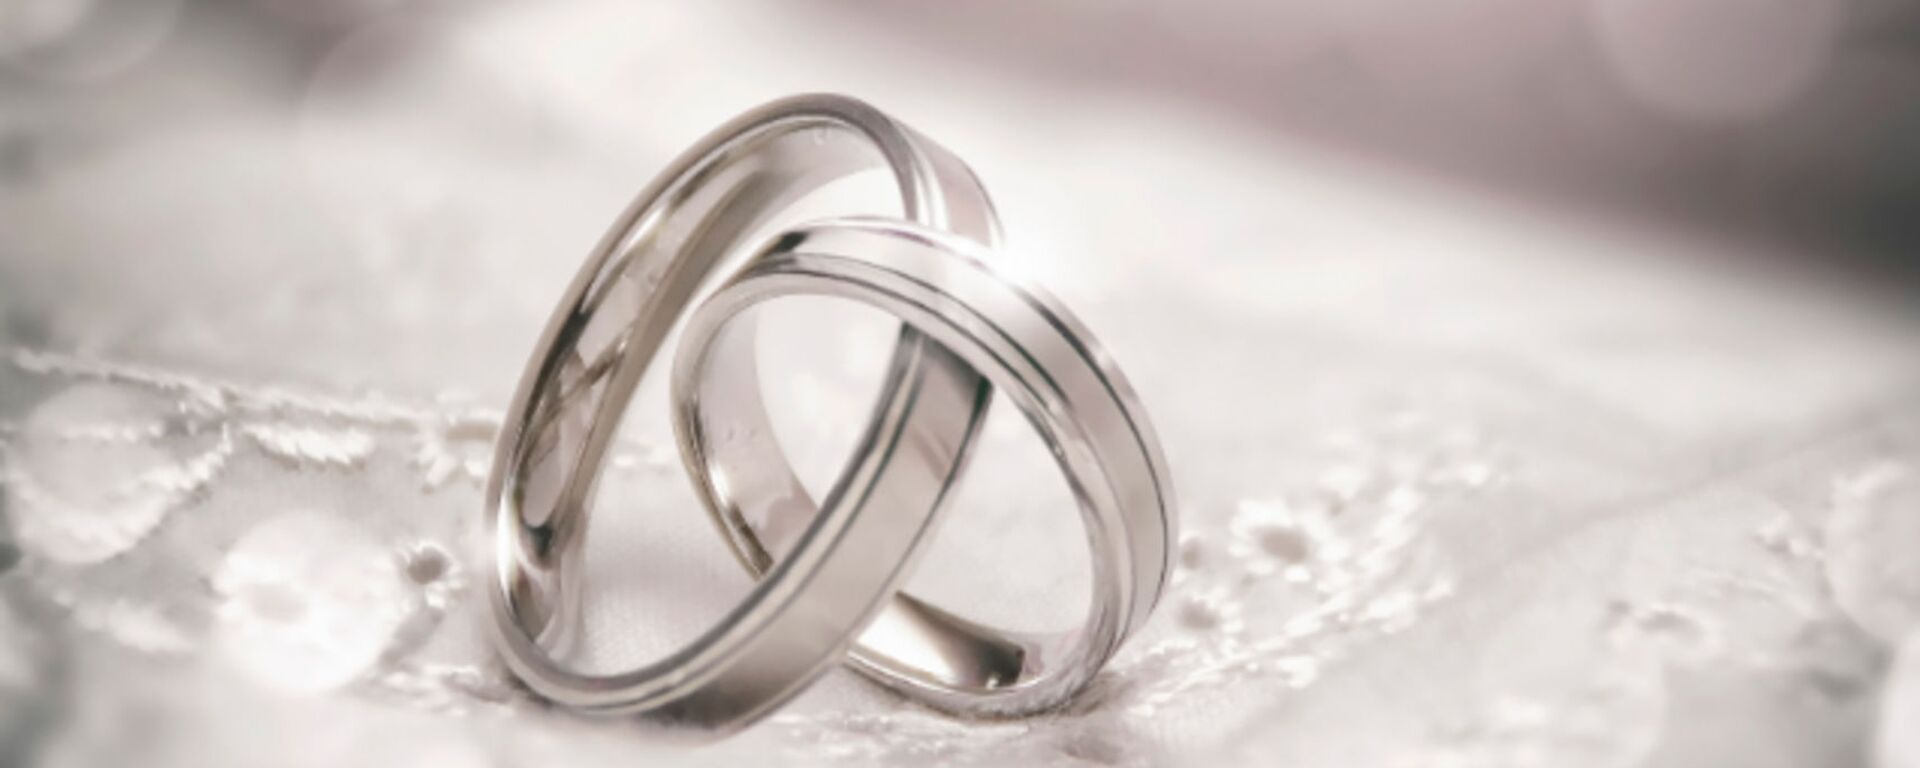 US Marriage Rate Falls to Lowest Level in 120 Years  - Sputnik International, 1920, 17.04.2022